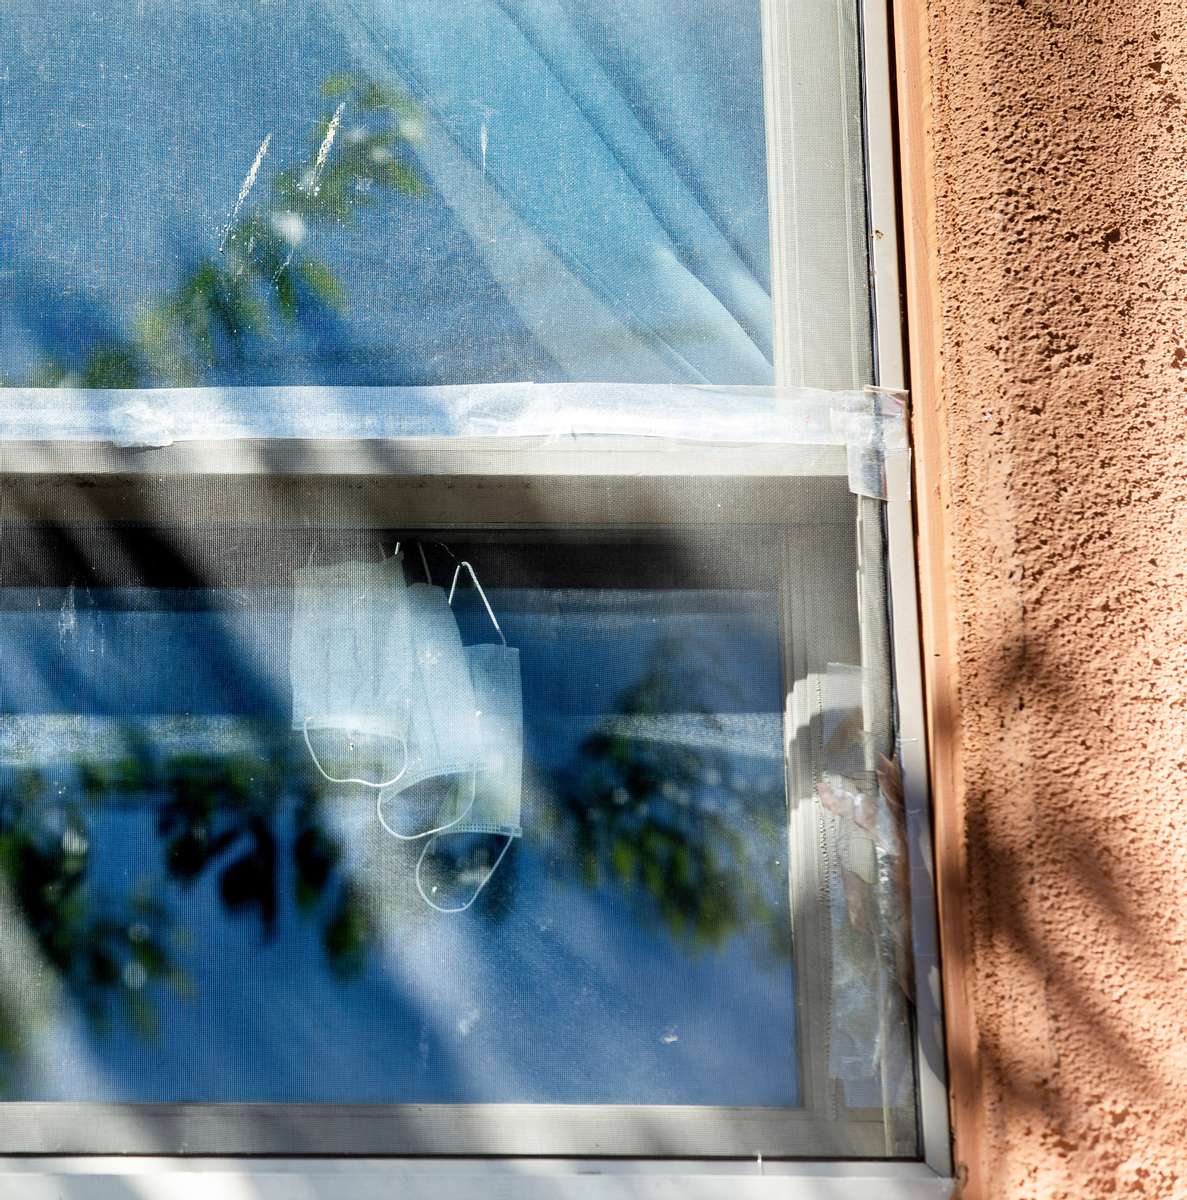 Surgical masks hang from a window in Seattle's Chinatown - International District on March 26, 2020. This project was produced in collaboration with the International Community Health Services (ICHS) documenting the effects of Covid-19  on the Chinatown-International District community. It was funded by Historic South Downtown, SPJ Western Washington Passion Project grant, and support from King County 4Culture. (photo by Karen Ducey)